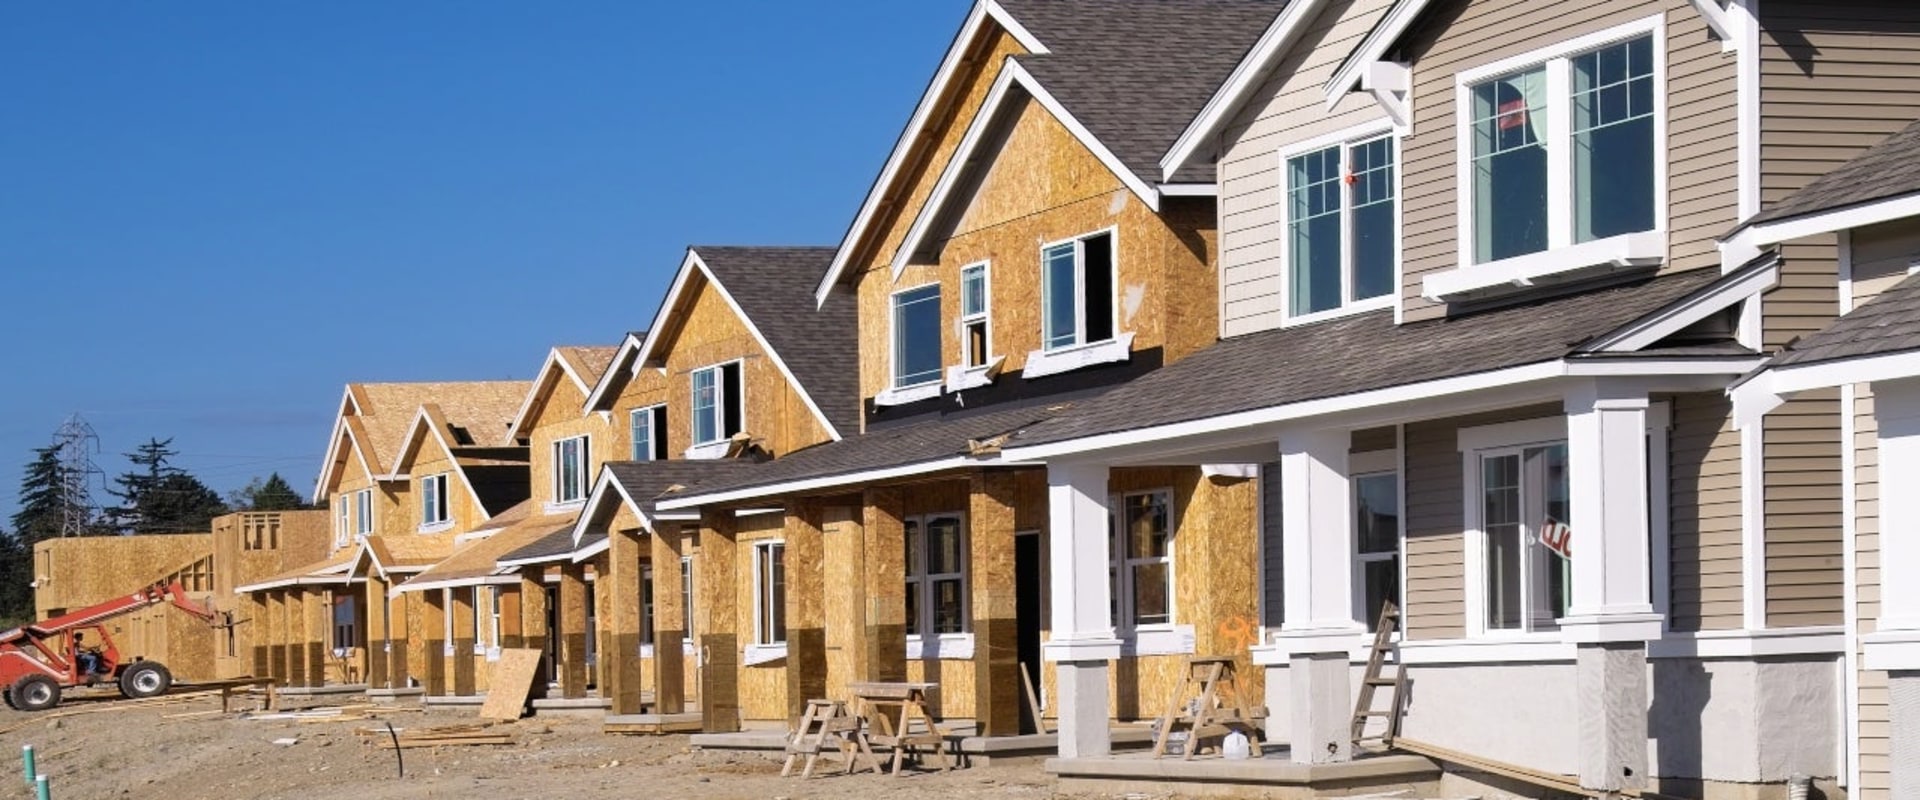 Hidden Costs to Watch Out For: A Guide to Budgeting for Your Home Construction Project